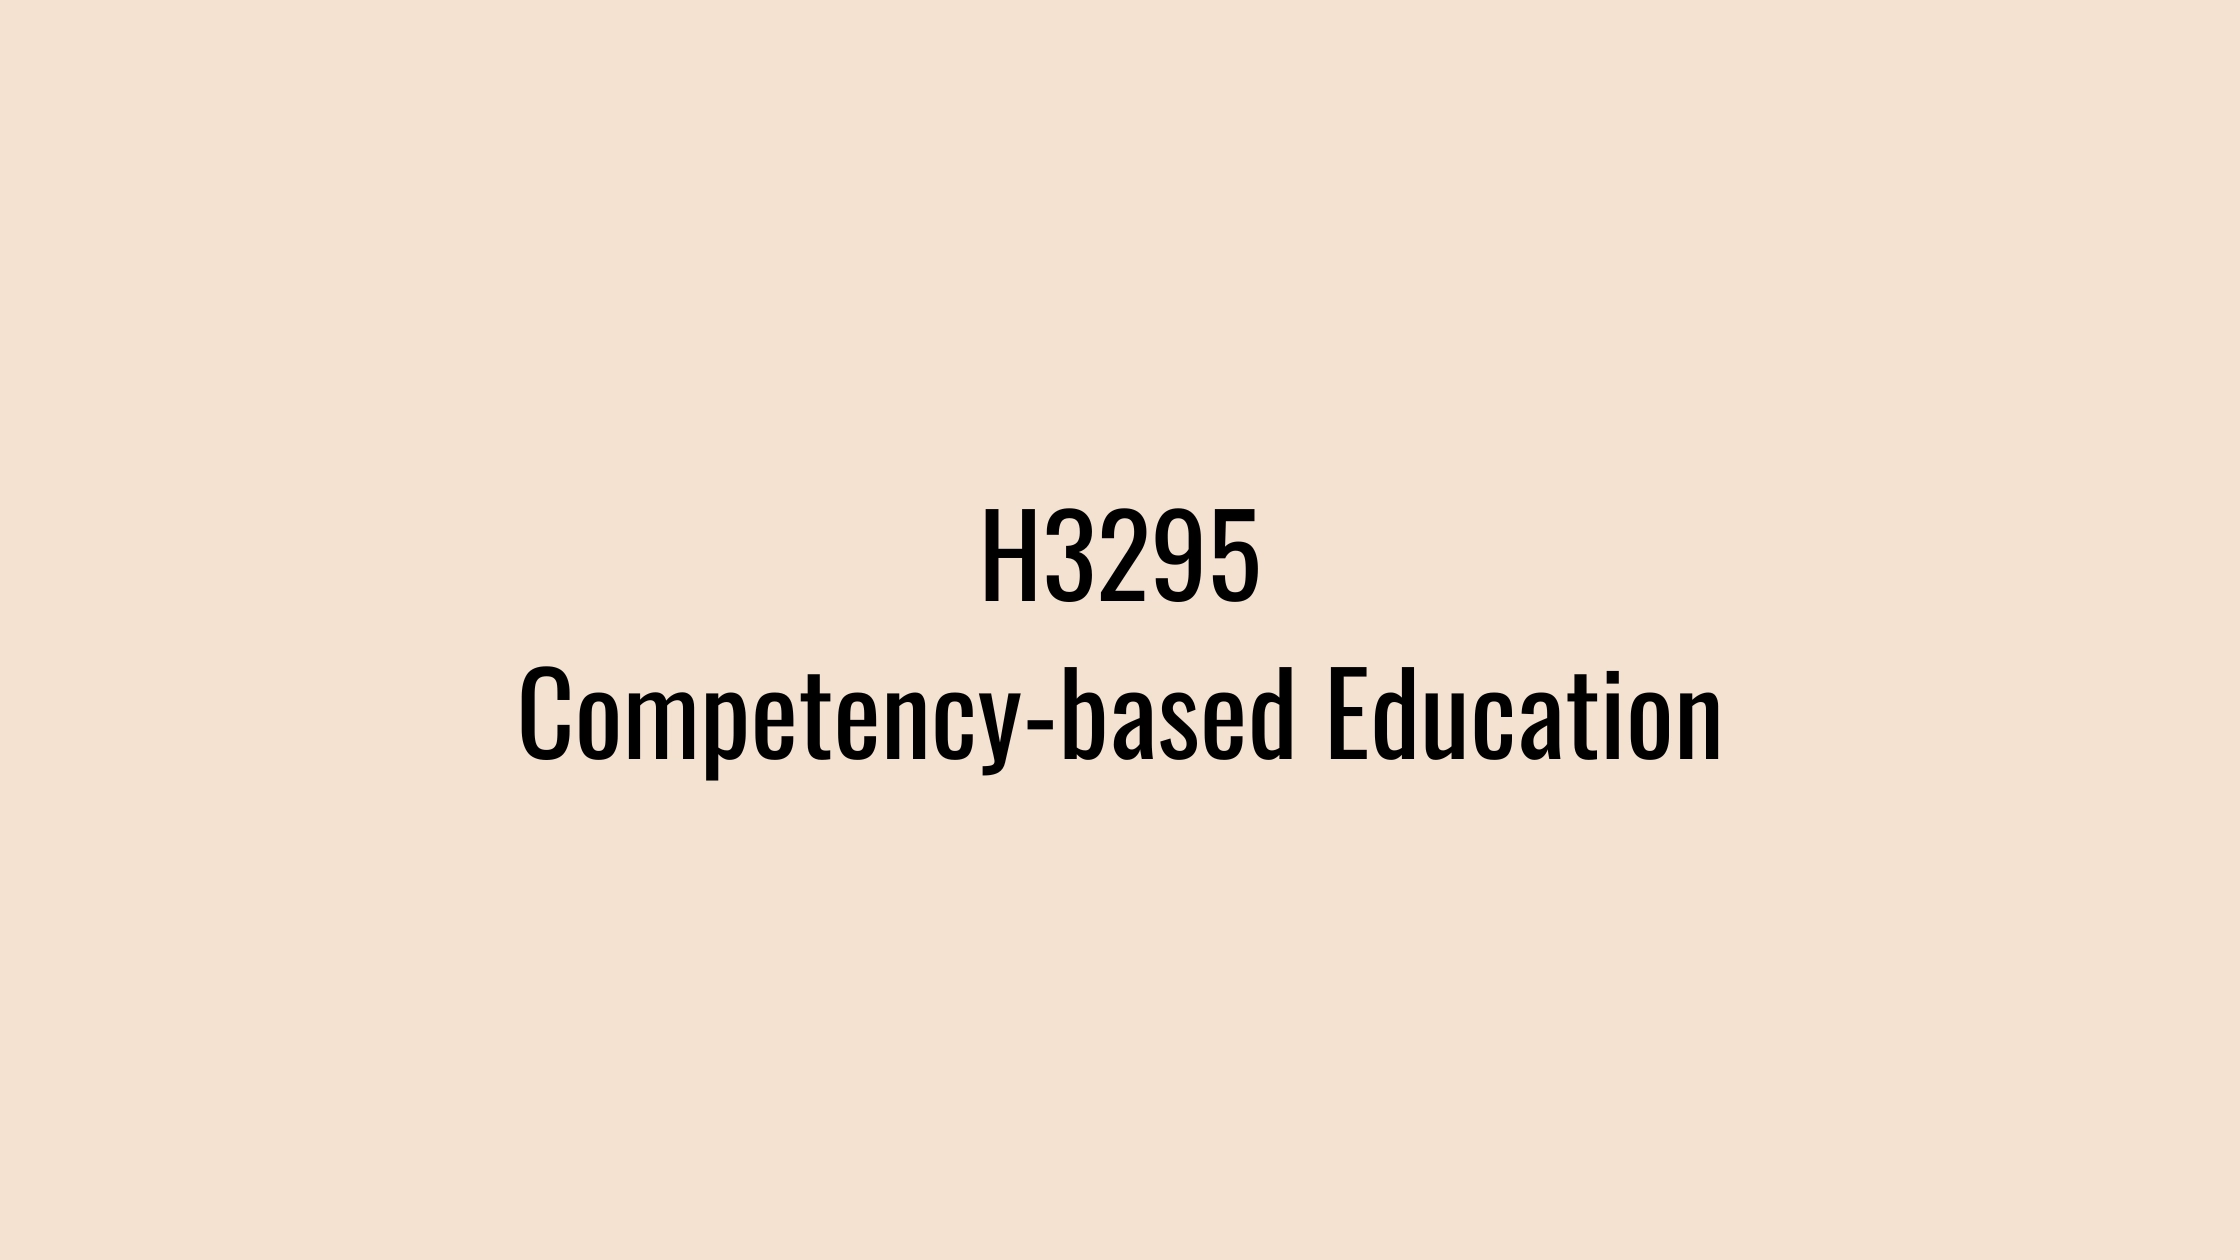 H3295: Competency-based Education